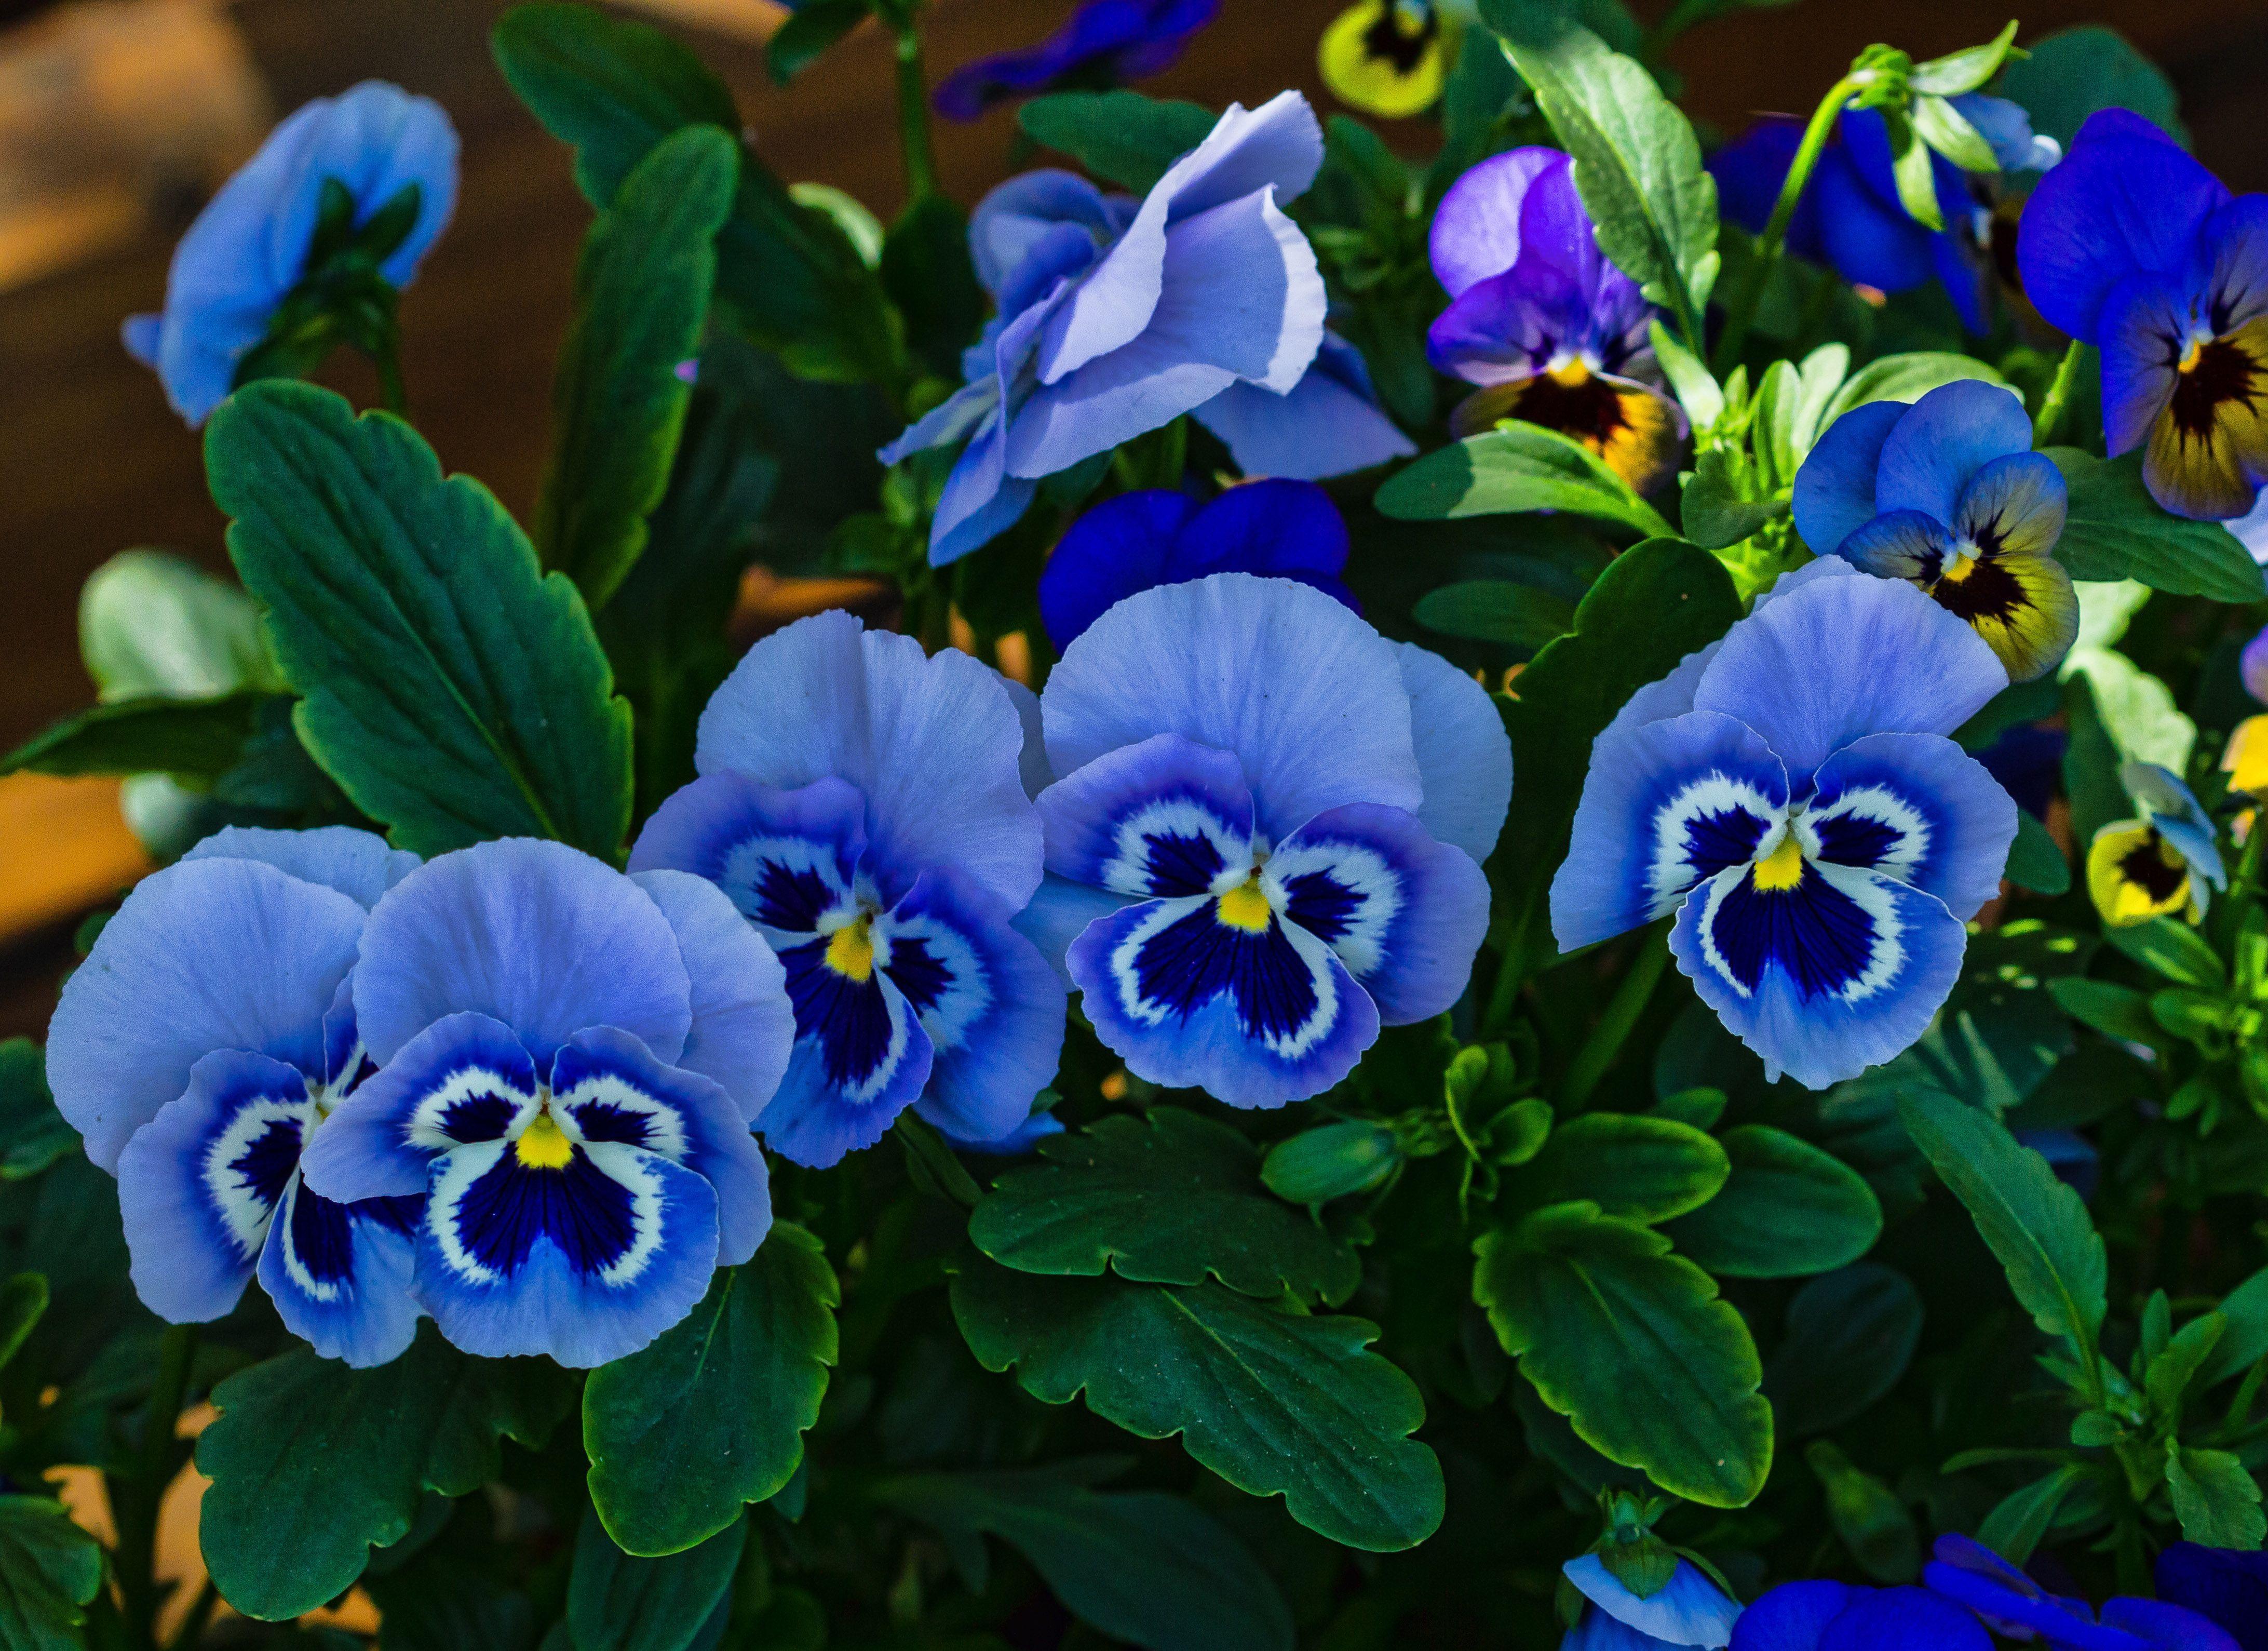 Blue pansies bloom on a glade wallpaper and image